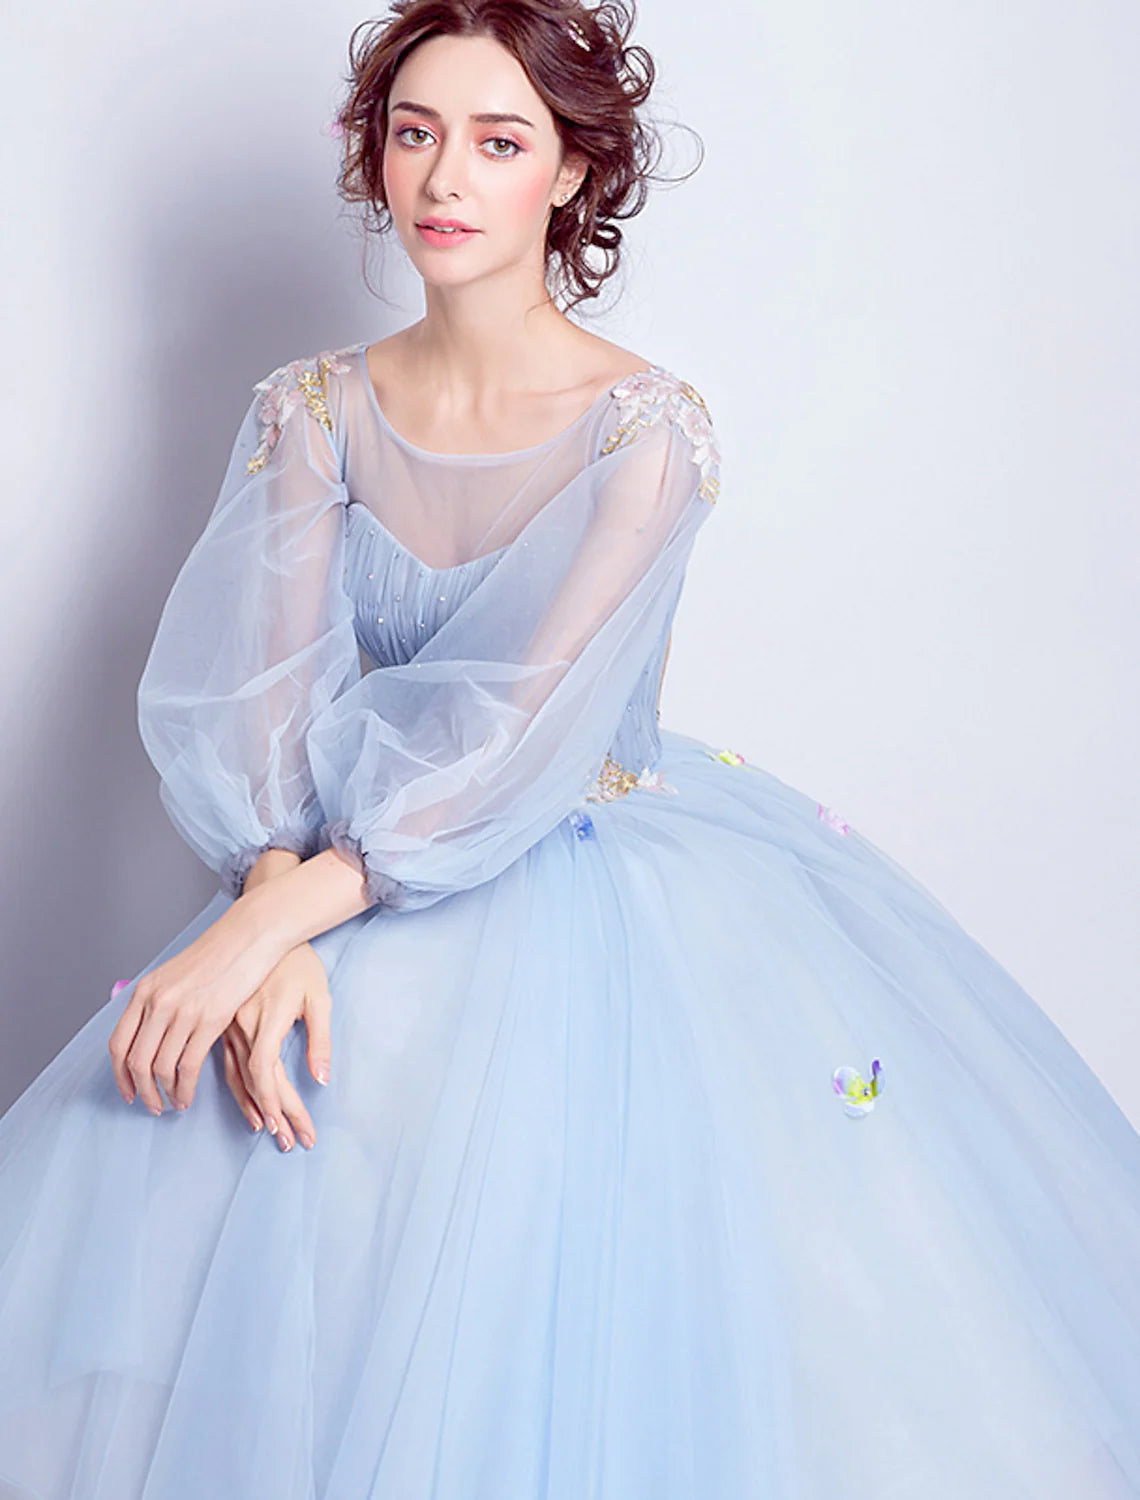 Ball Gown Elegant Floral Puffy Quinceanera Engagement Dress Illusion Neck 3/4 Length Sleeve Floor Length Tulle with Pleats Appliques